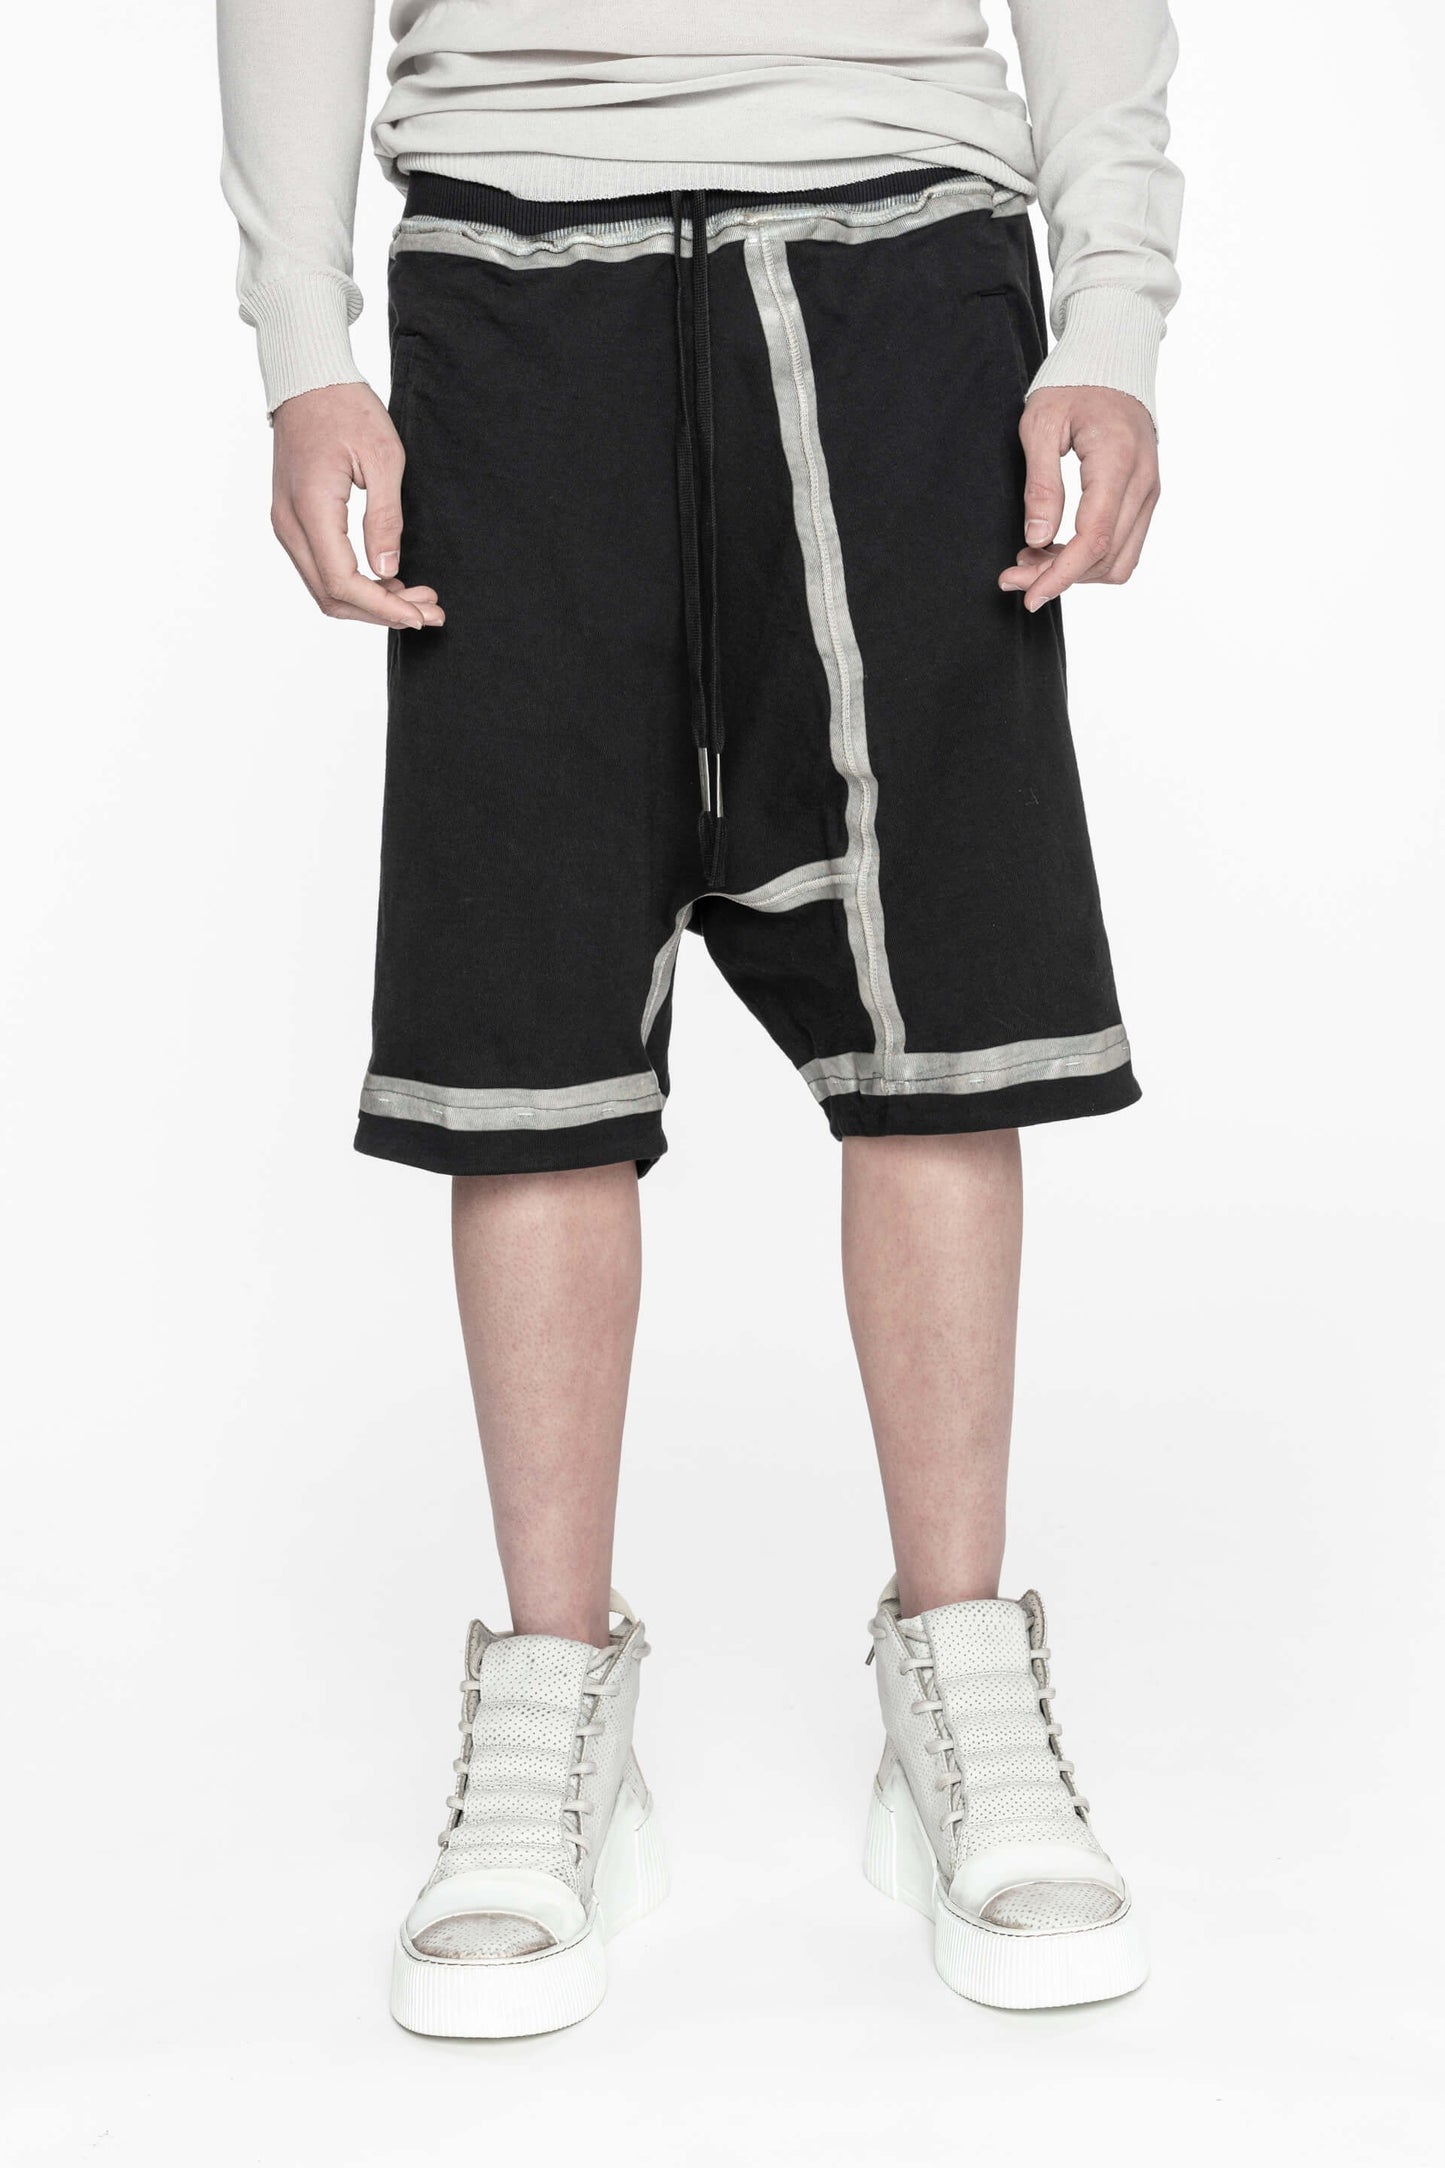 Black Object Dyed Seam Taped Drop Crotch Shorts P10.2ST